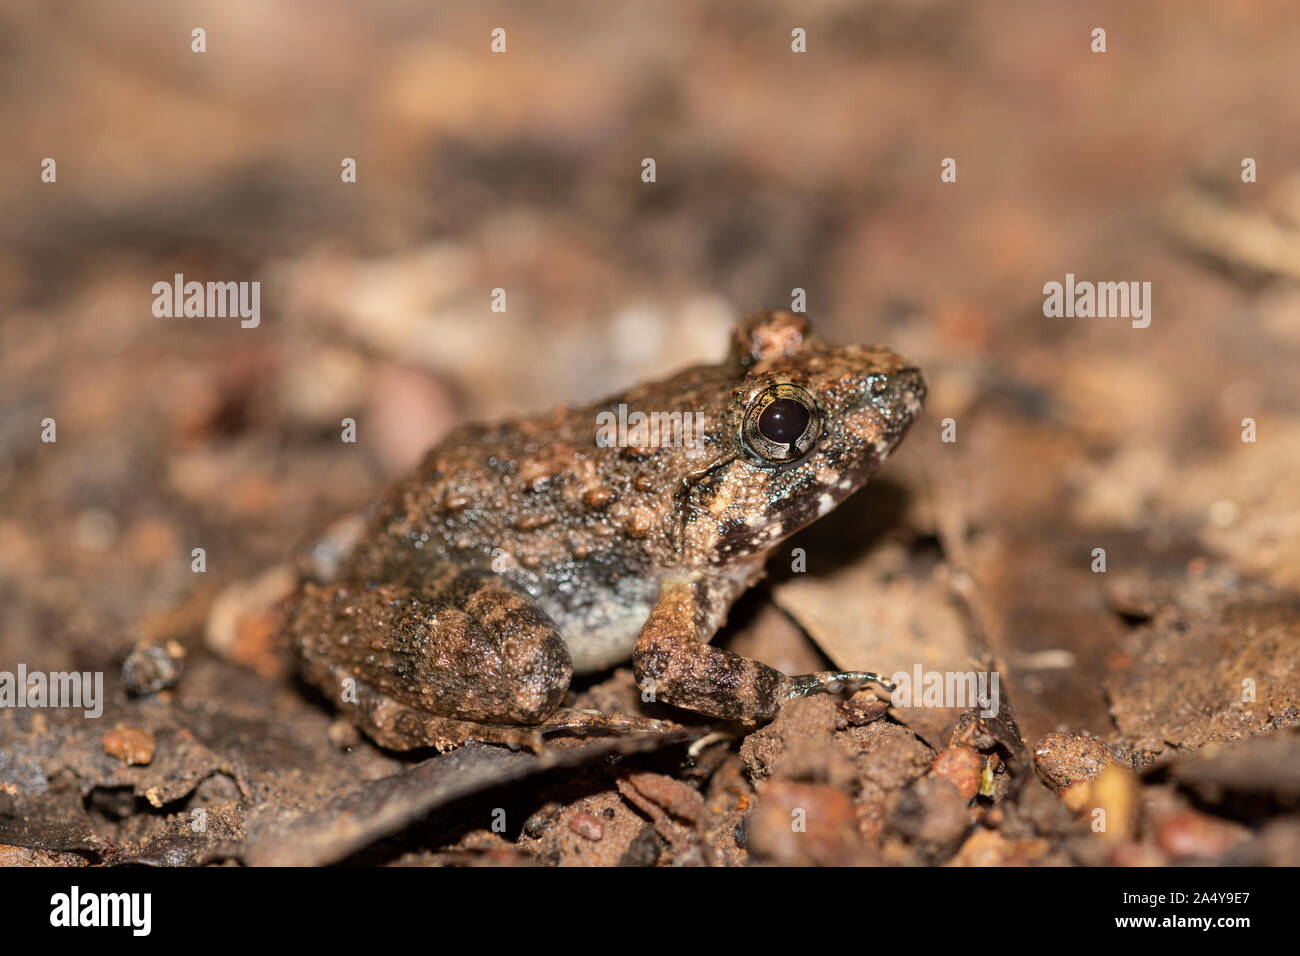 Limnonectes gyldenstolpei (common name: Gyldenstolpe's frog) is a species of frog in the Dicroglossidae family. It is found in northern Thailand, Laos Stock Photo